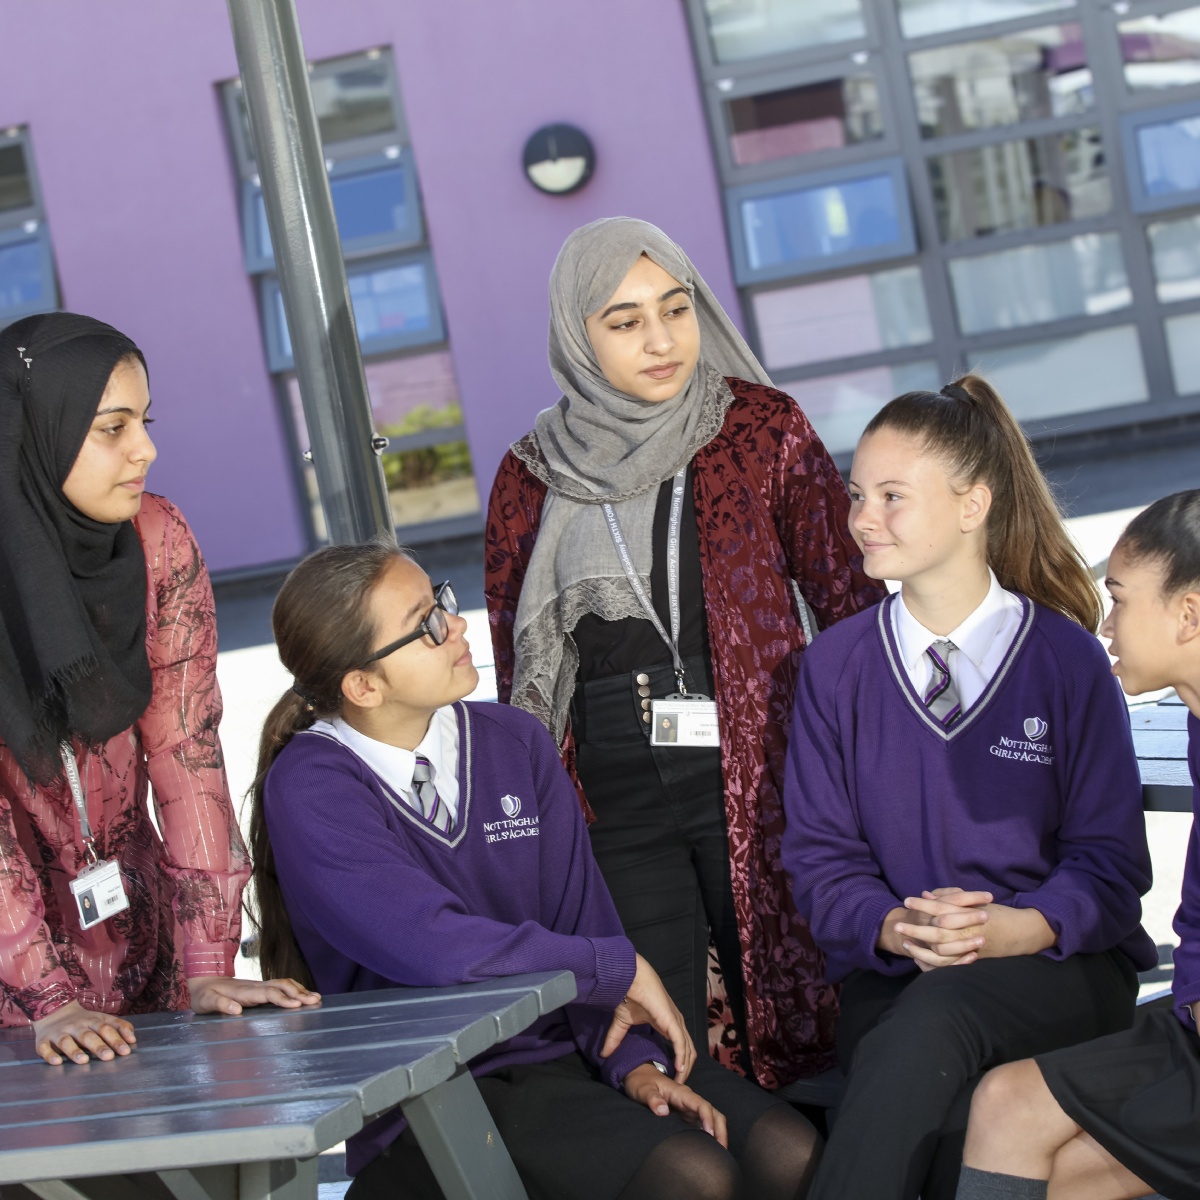 Nottingham Girls Academy Nottingham Girls Academy Rated The Best Performing School In